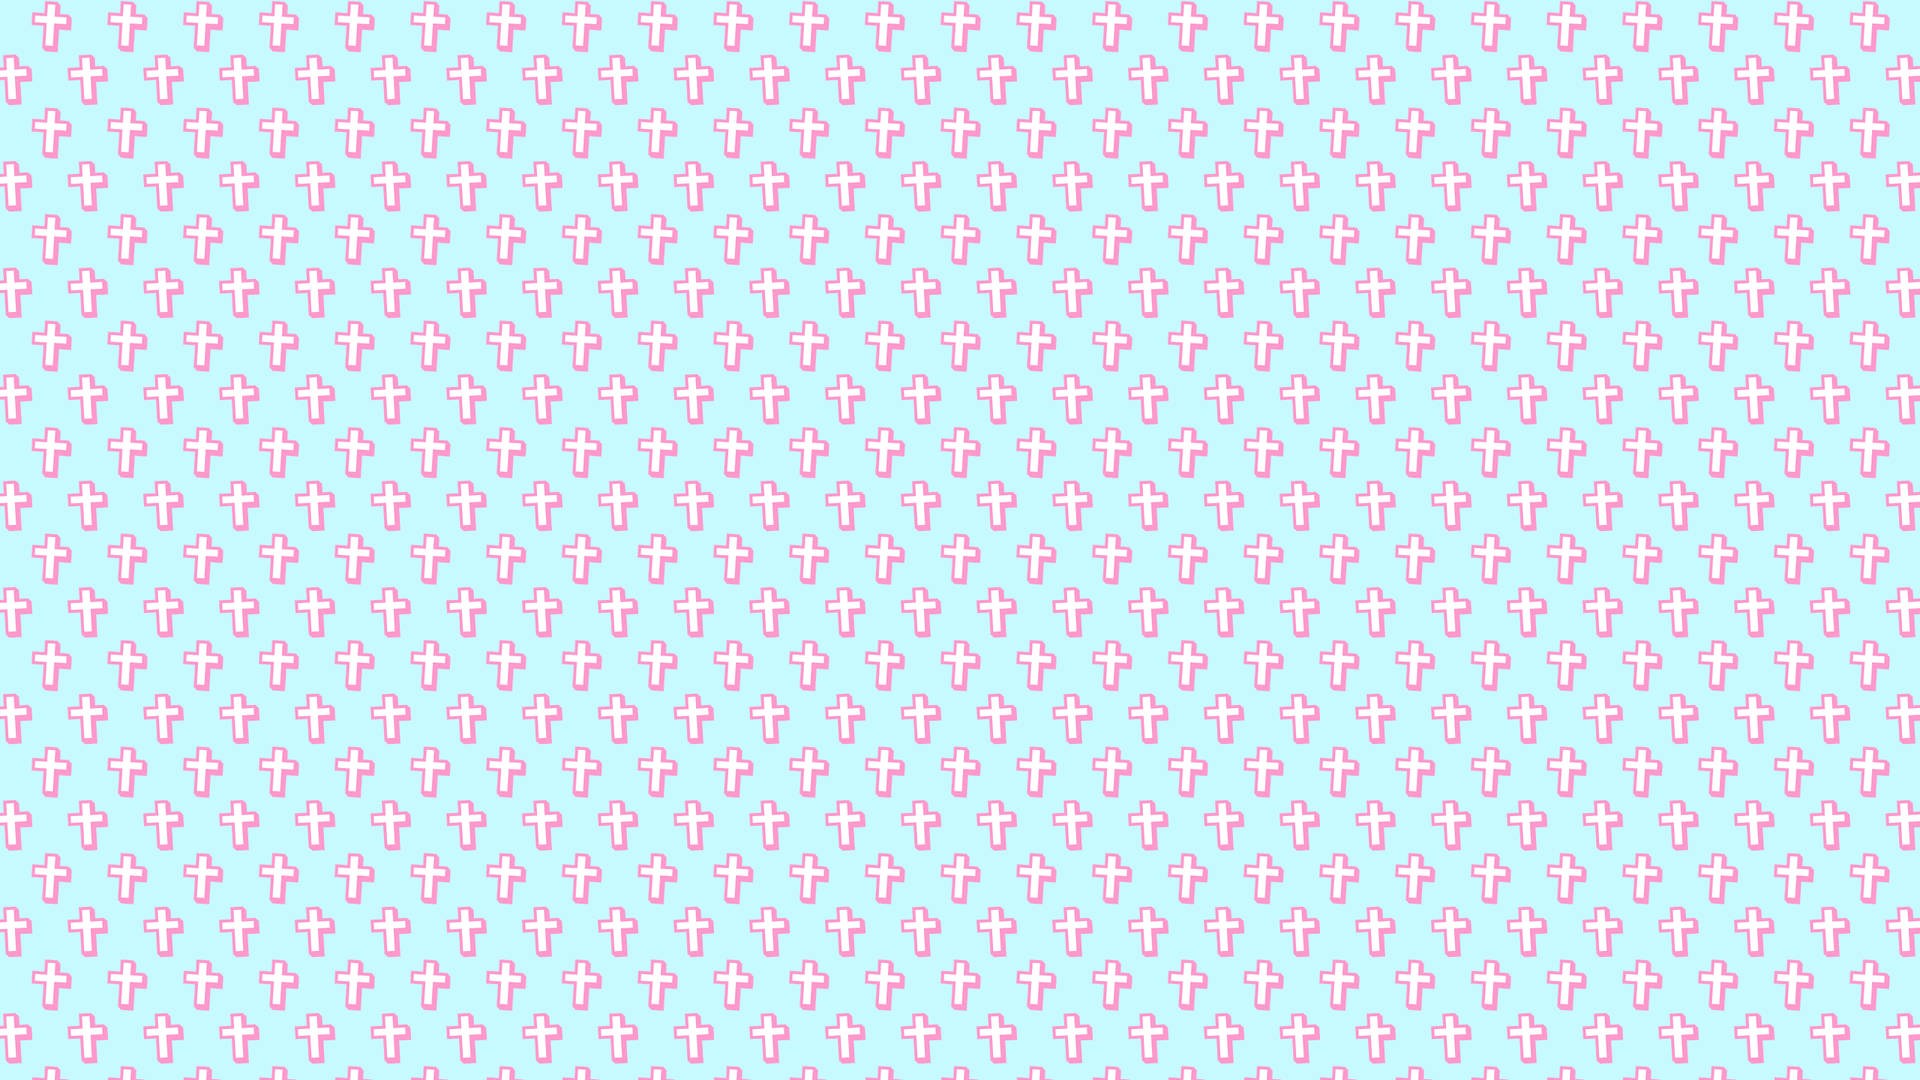 Cute Aesthetic Pc Pattern Of Crosses Background